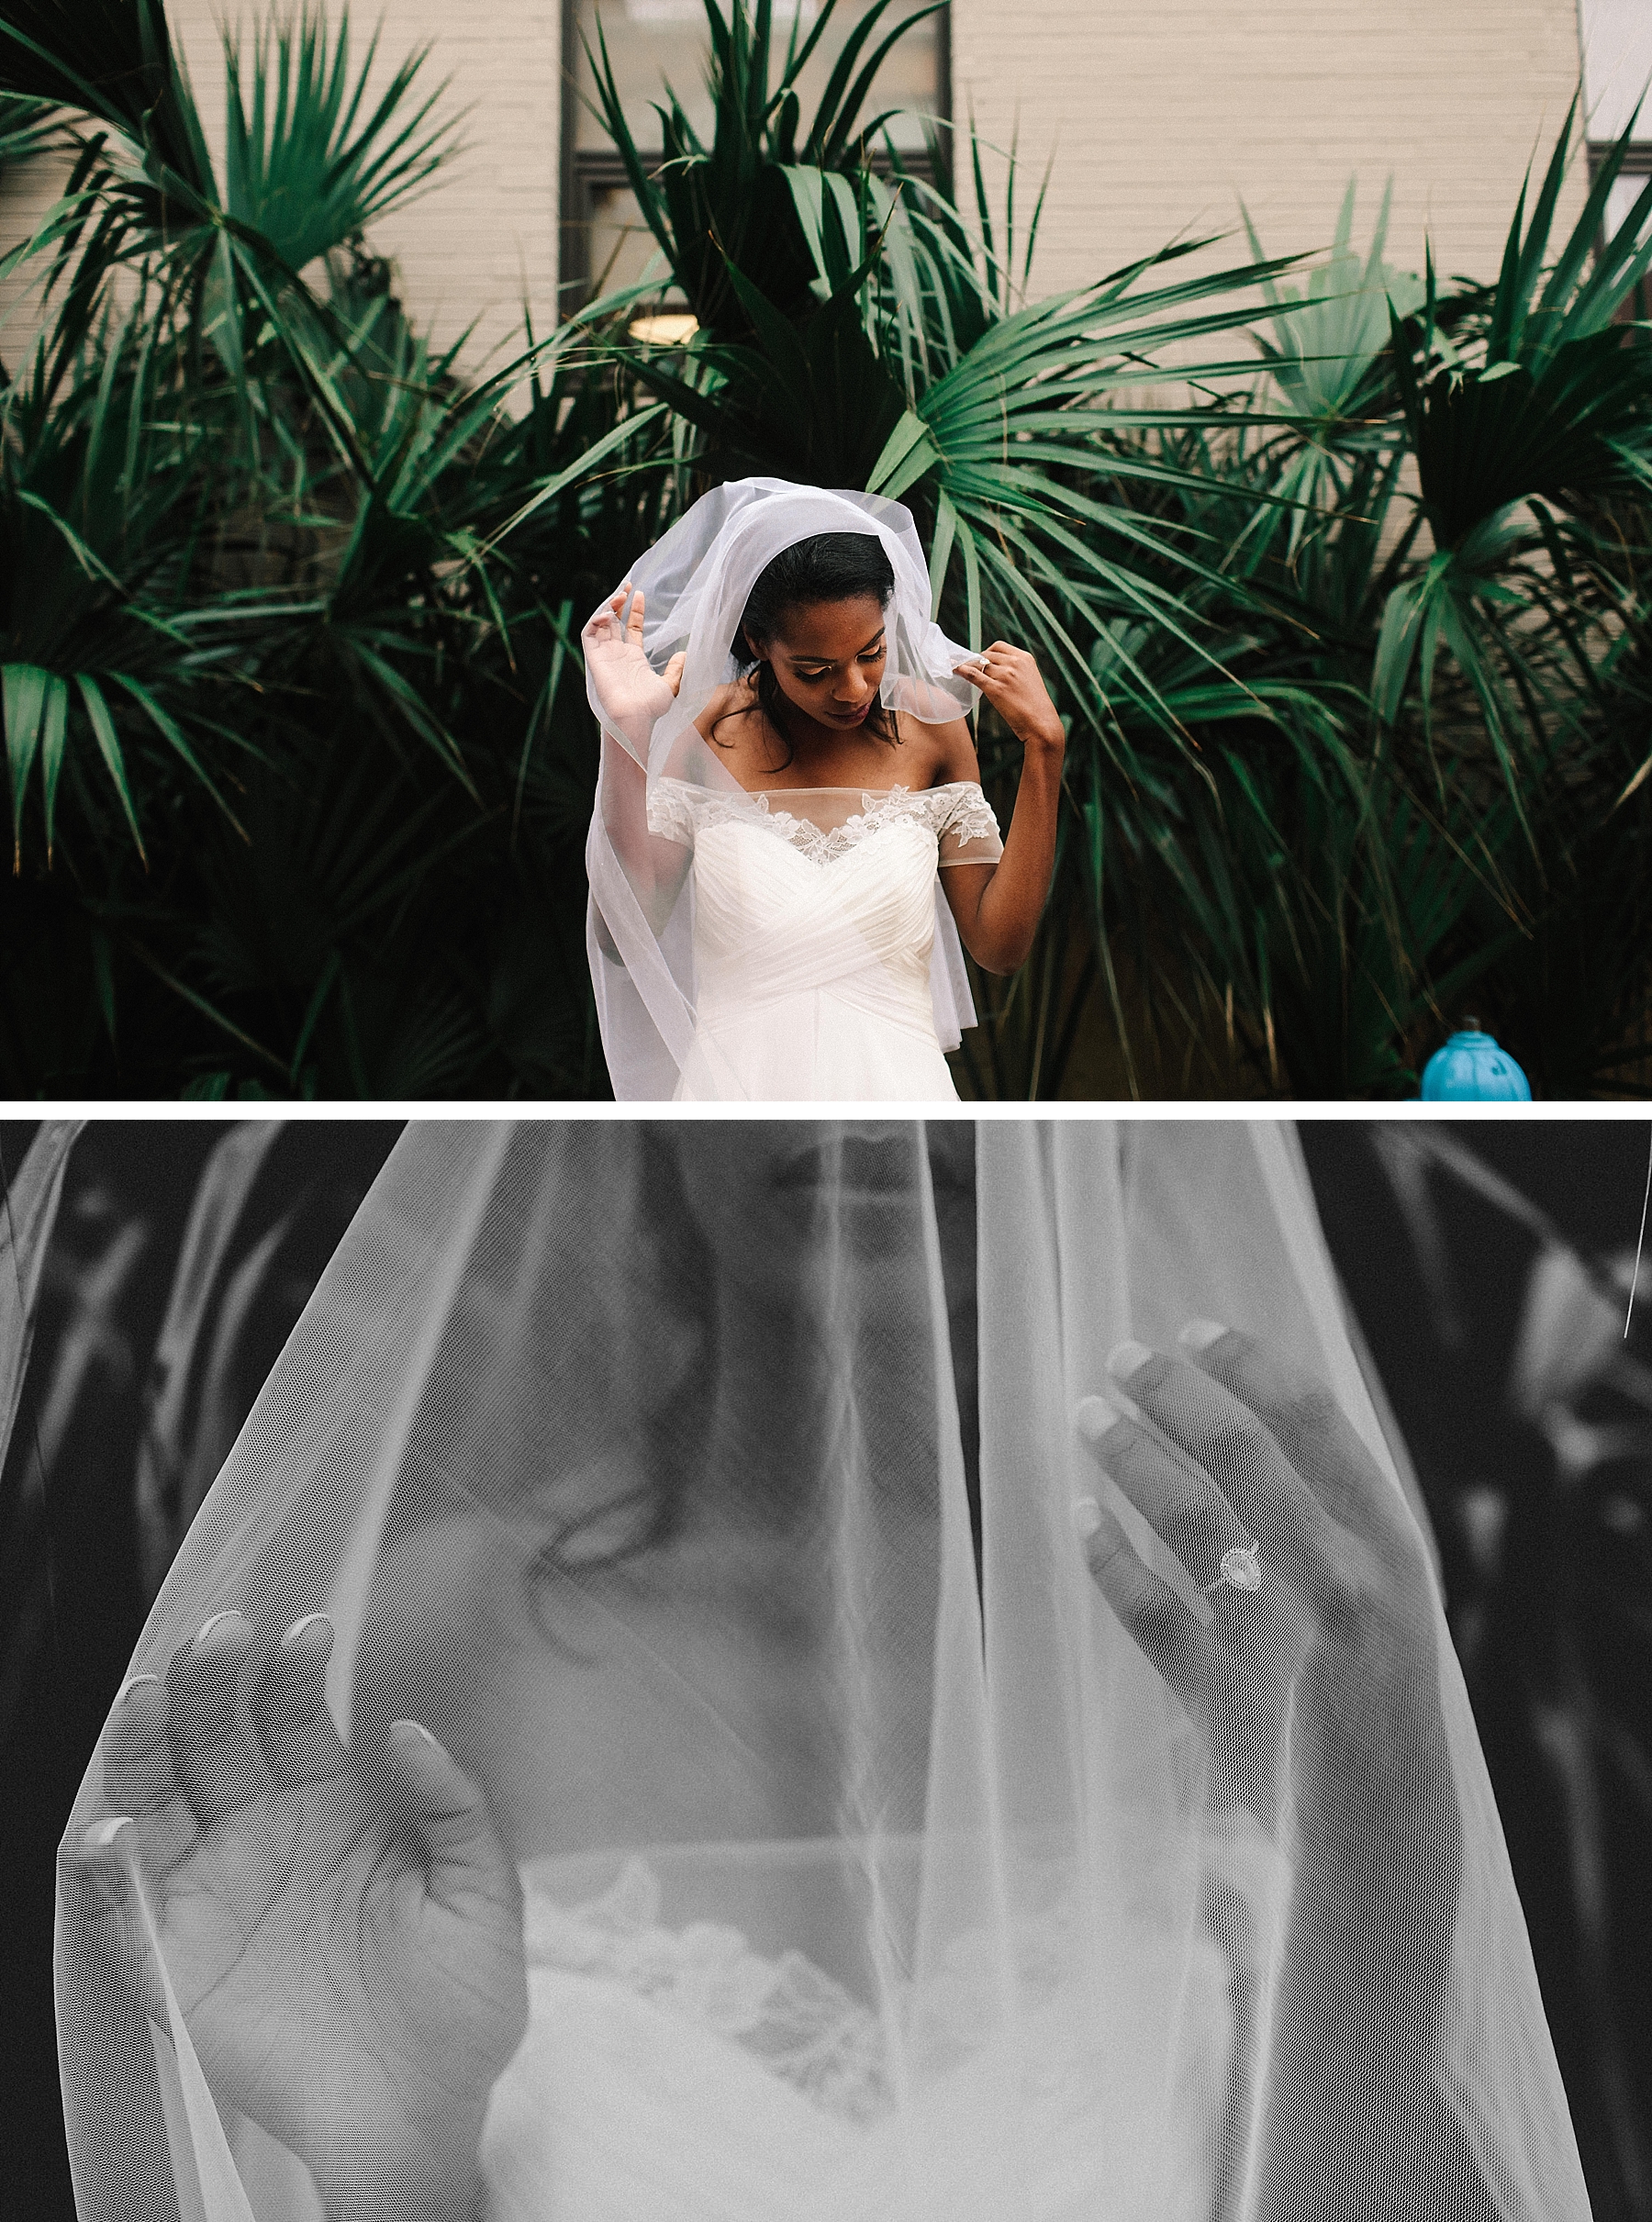 bridal veil at Event 1013 by Plano Wedding Photographer 